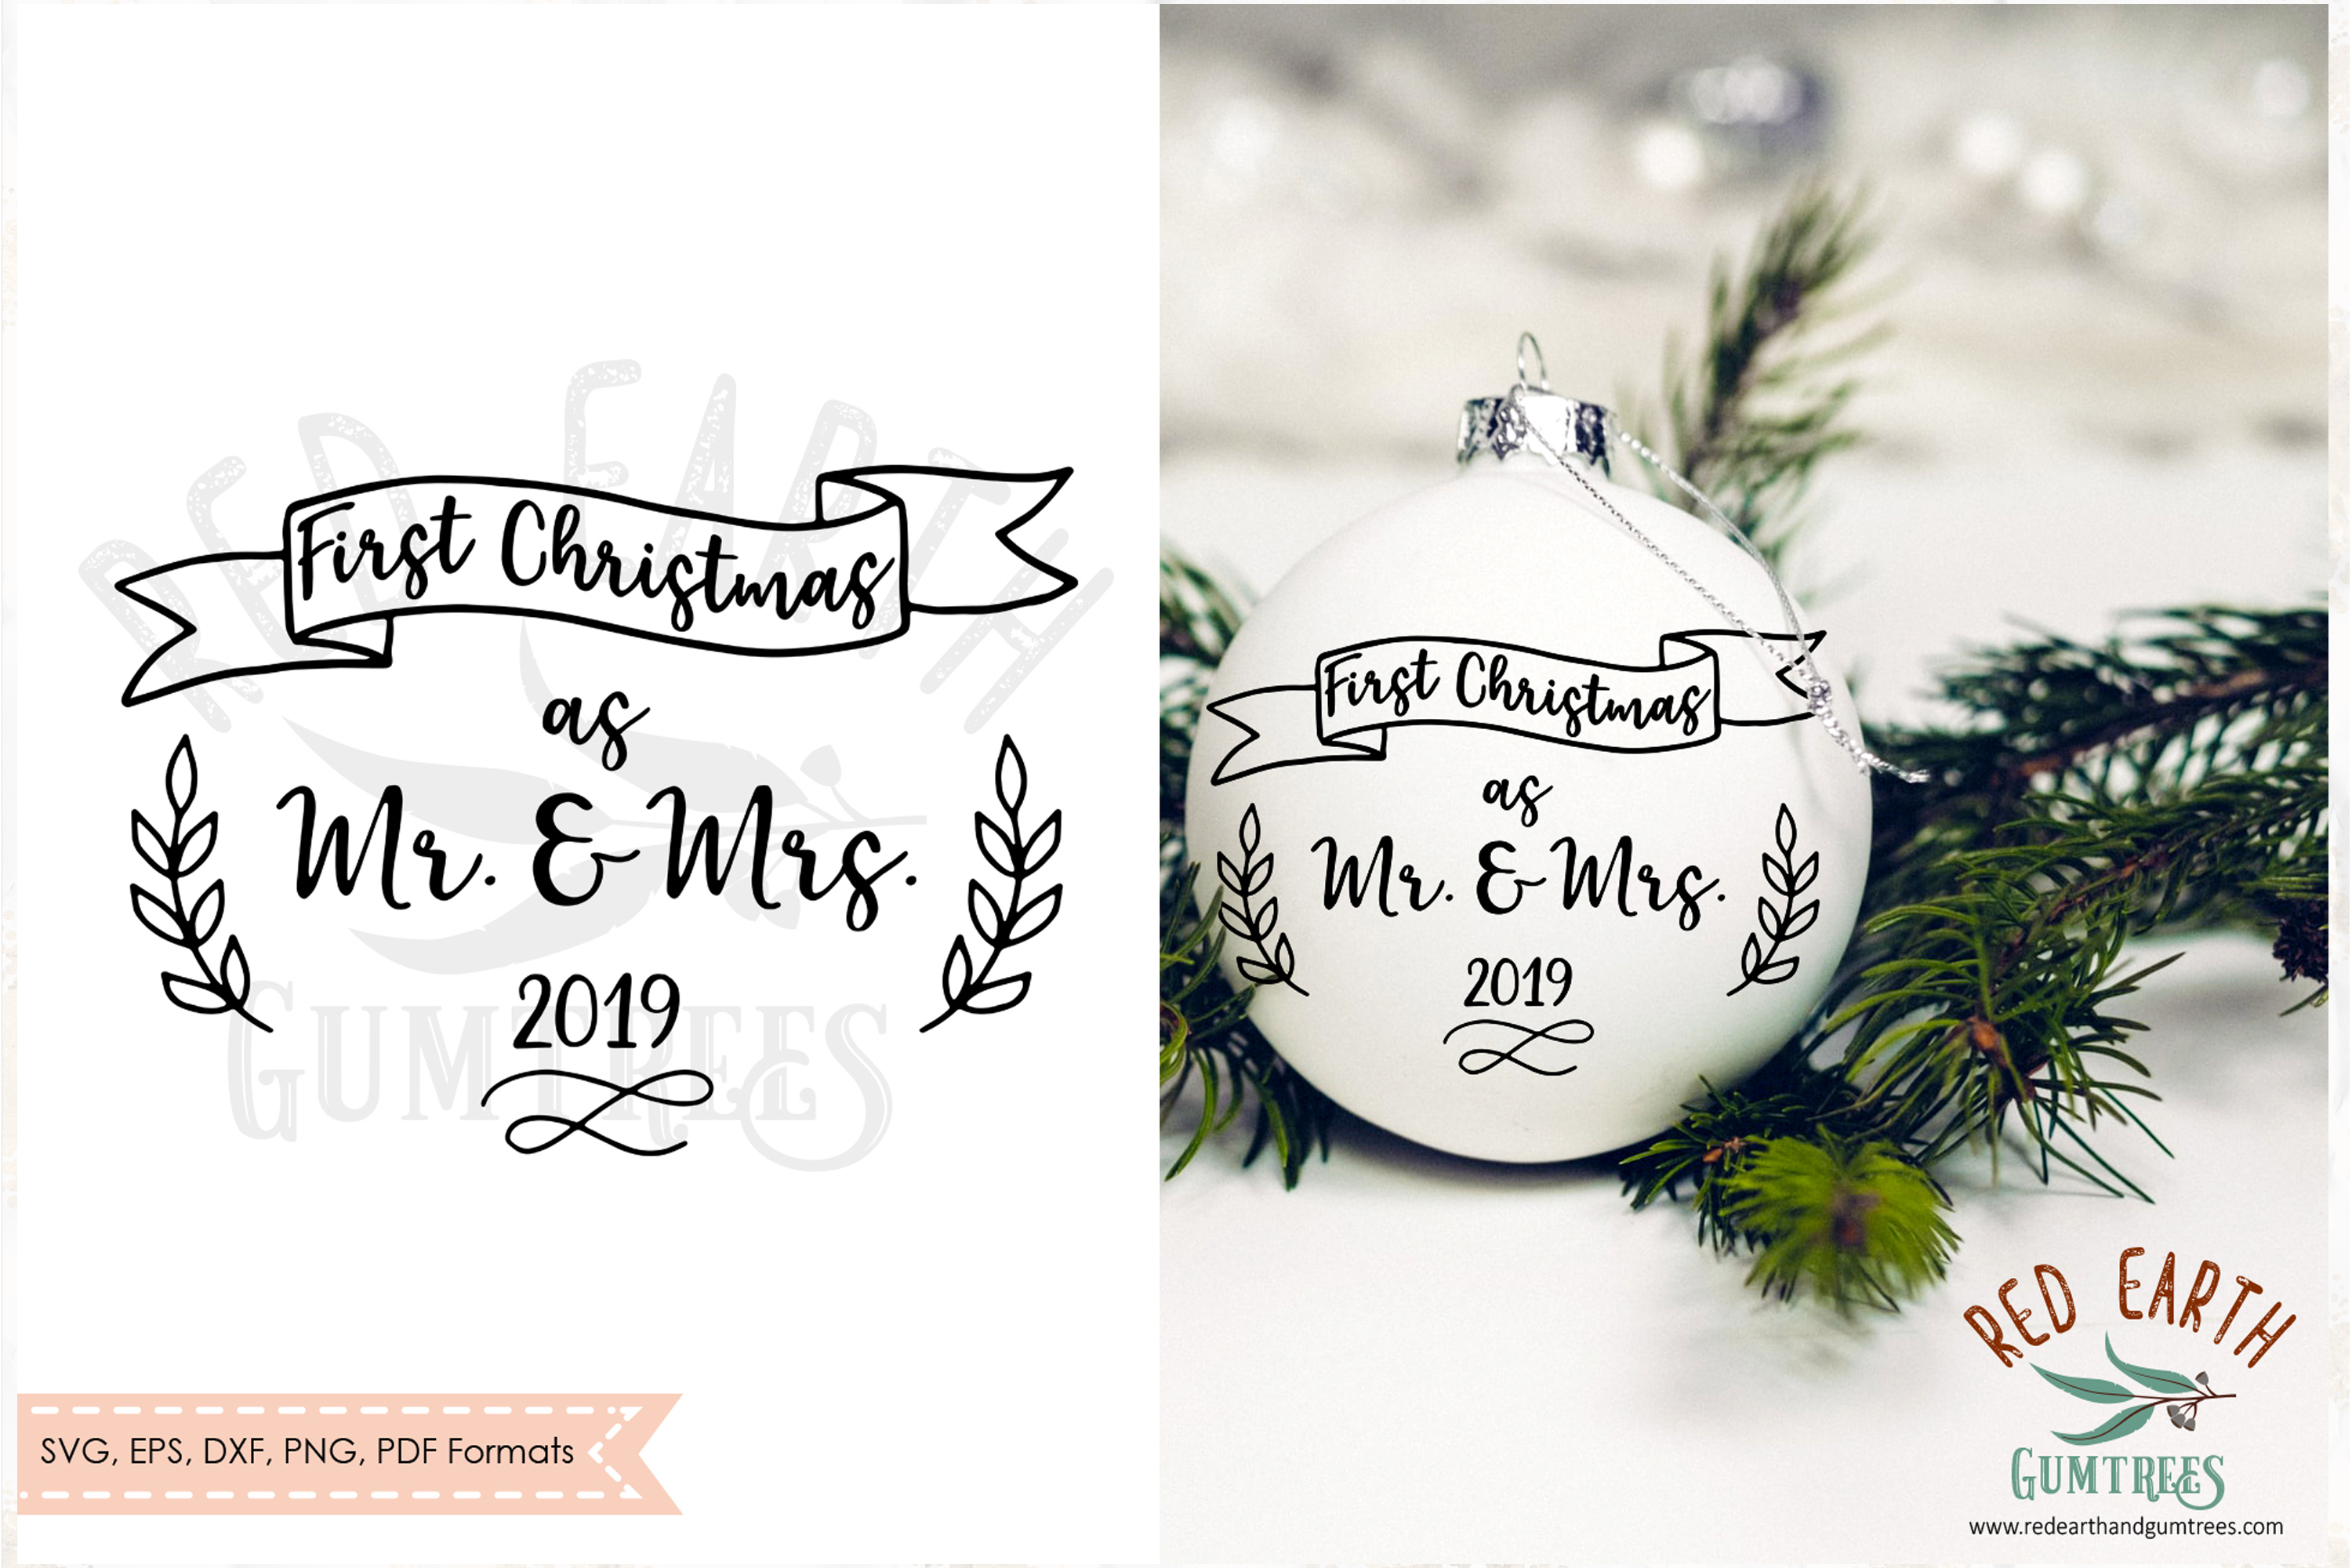 Download First Christmas as mr and Mrs, Newlyweds SVG,DXF,PNG,EPS,PDF